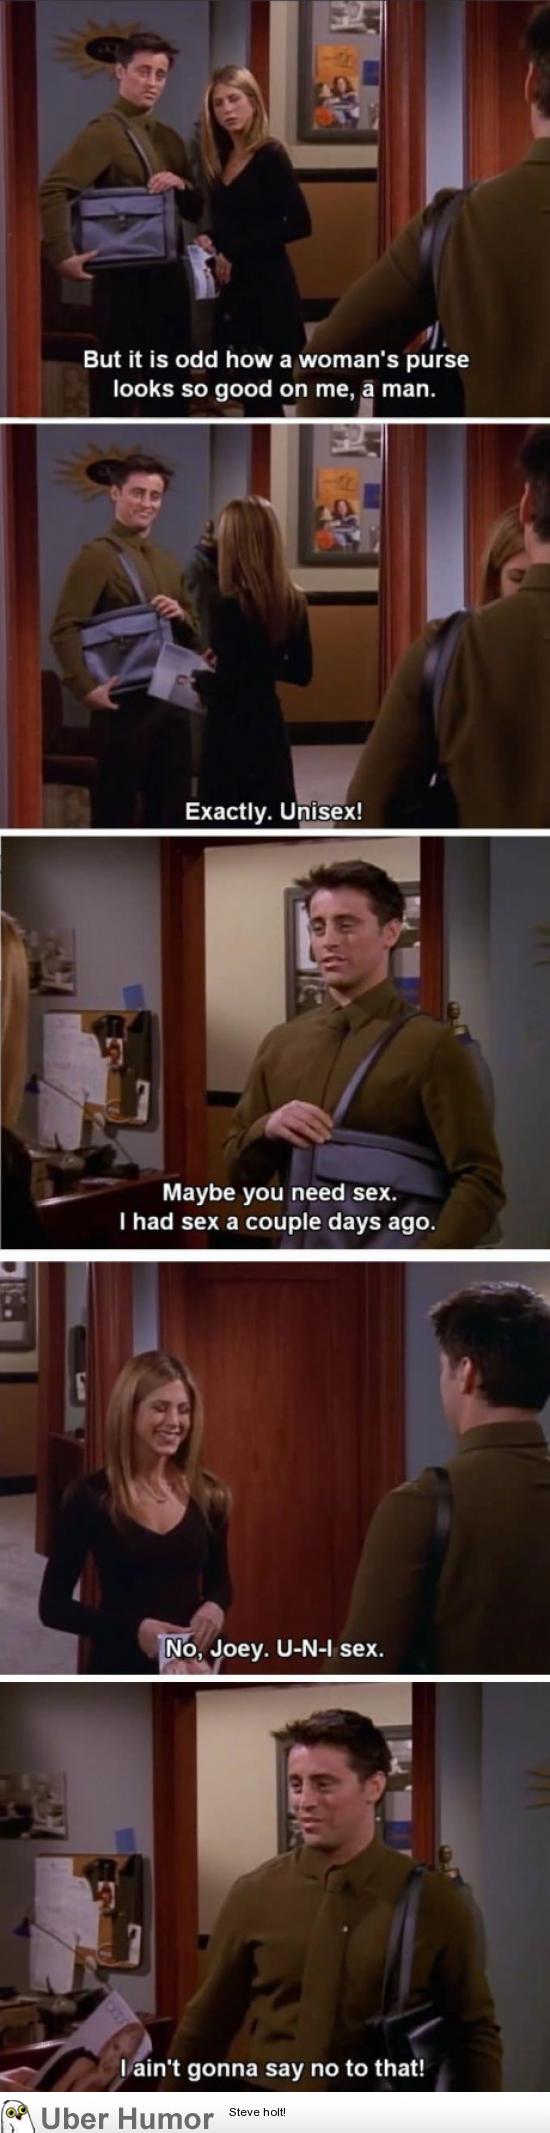 My favorite Joey moment | Funny Pictures, Quotes, Pics, Photos, Images ...